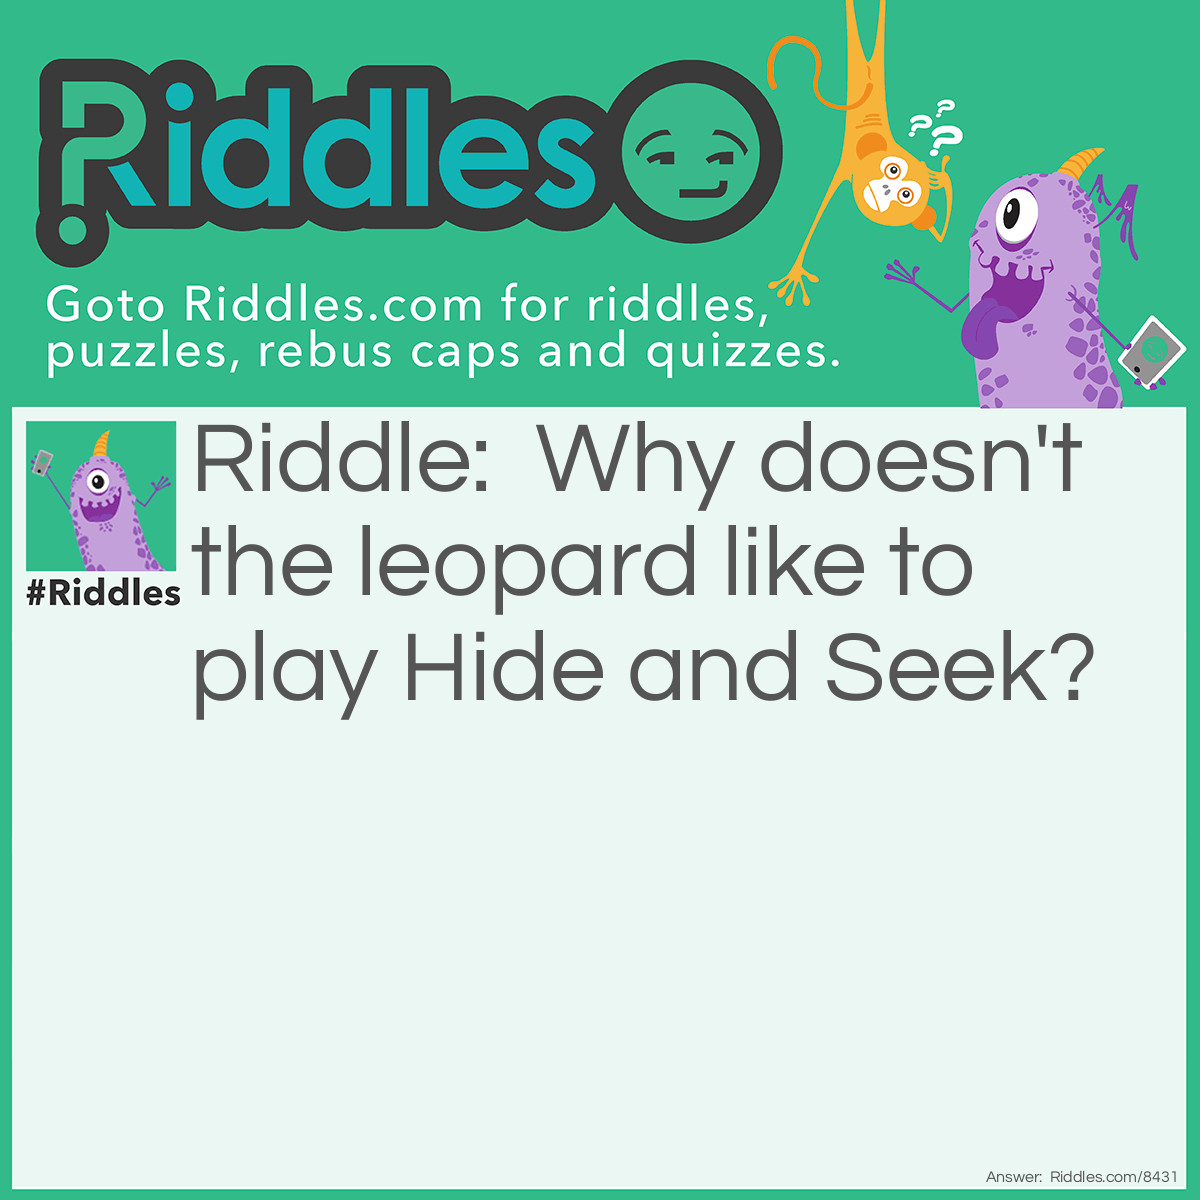 Riddle: Why doesn't the leopard like to play Hide and Seek? Answer: Because it is always spotted!